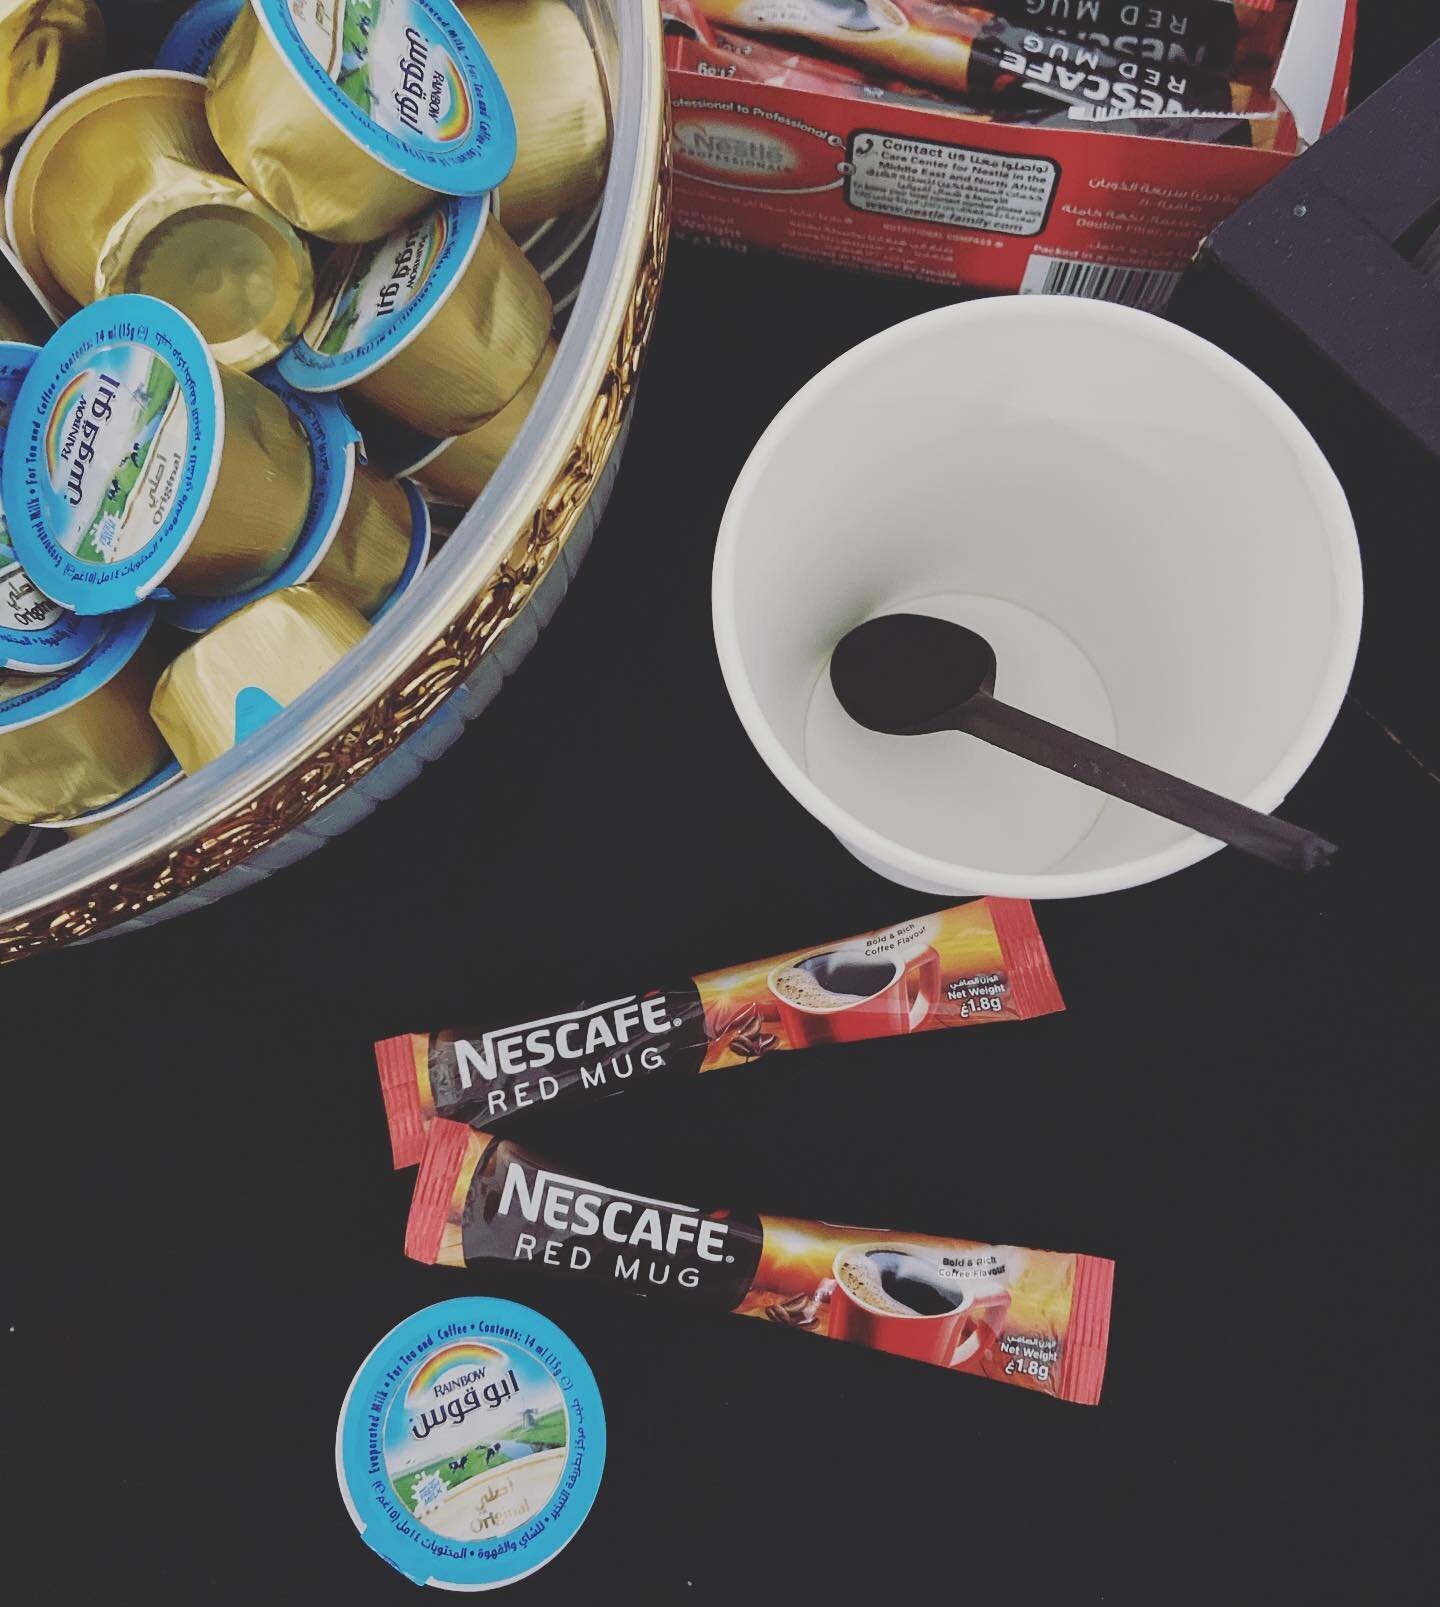 When duty calls 😆

How do you drink your @nescafearabia ? After several attemps, double shot with a splash of @rainbowmilk is my favorite so far.. 

Ha! funny how perspective and preference can change, context dependant

Lenses and paradigms are eve